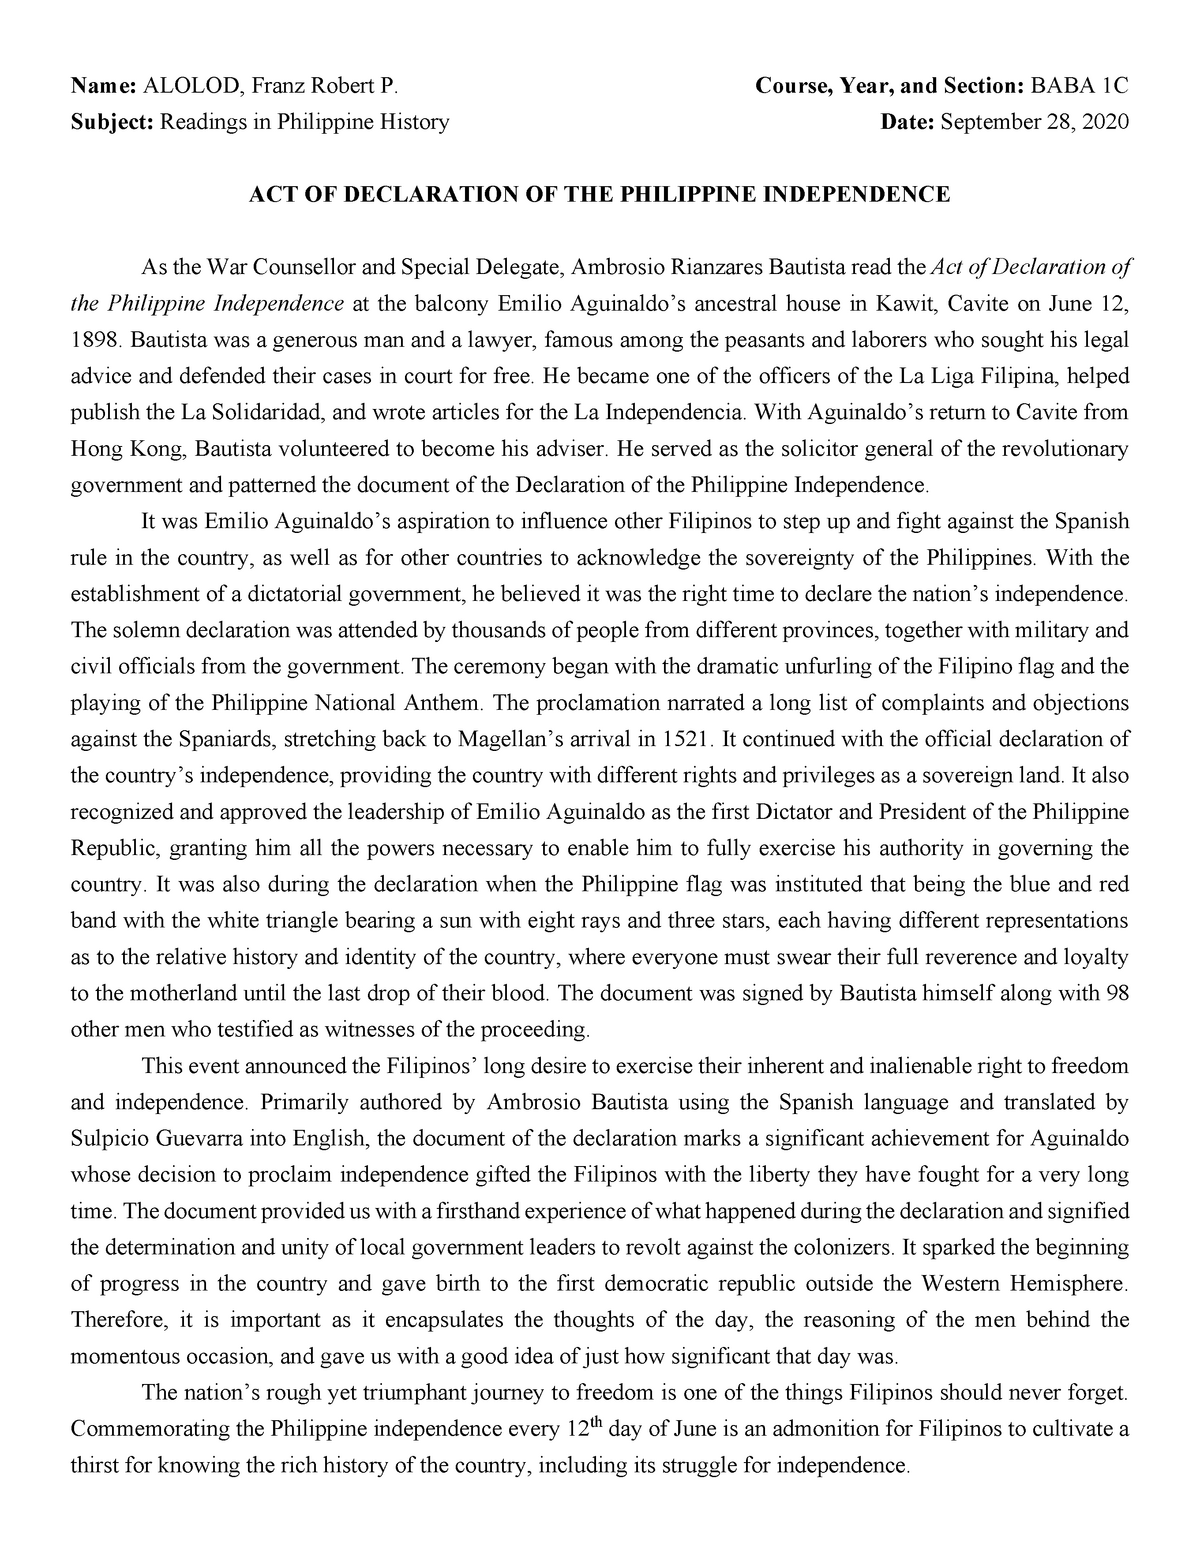 critical essay about proclamation of philippine independence